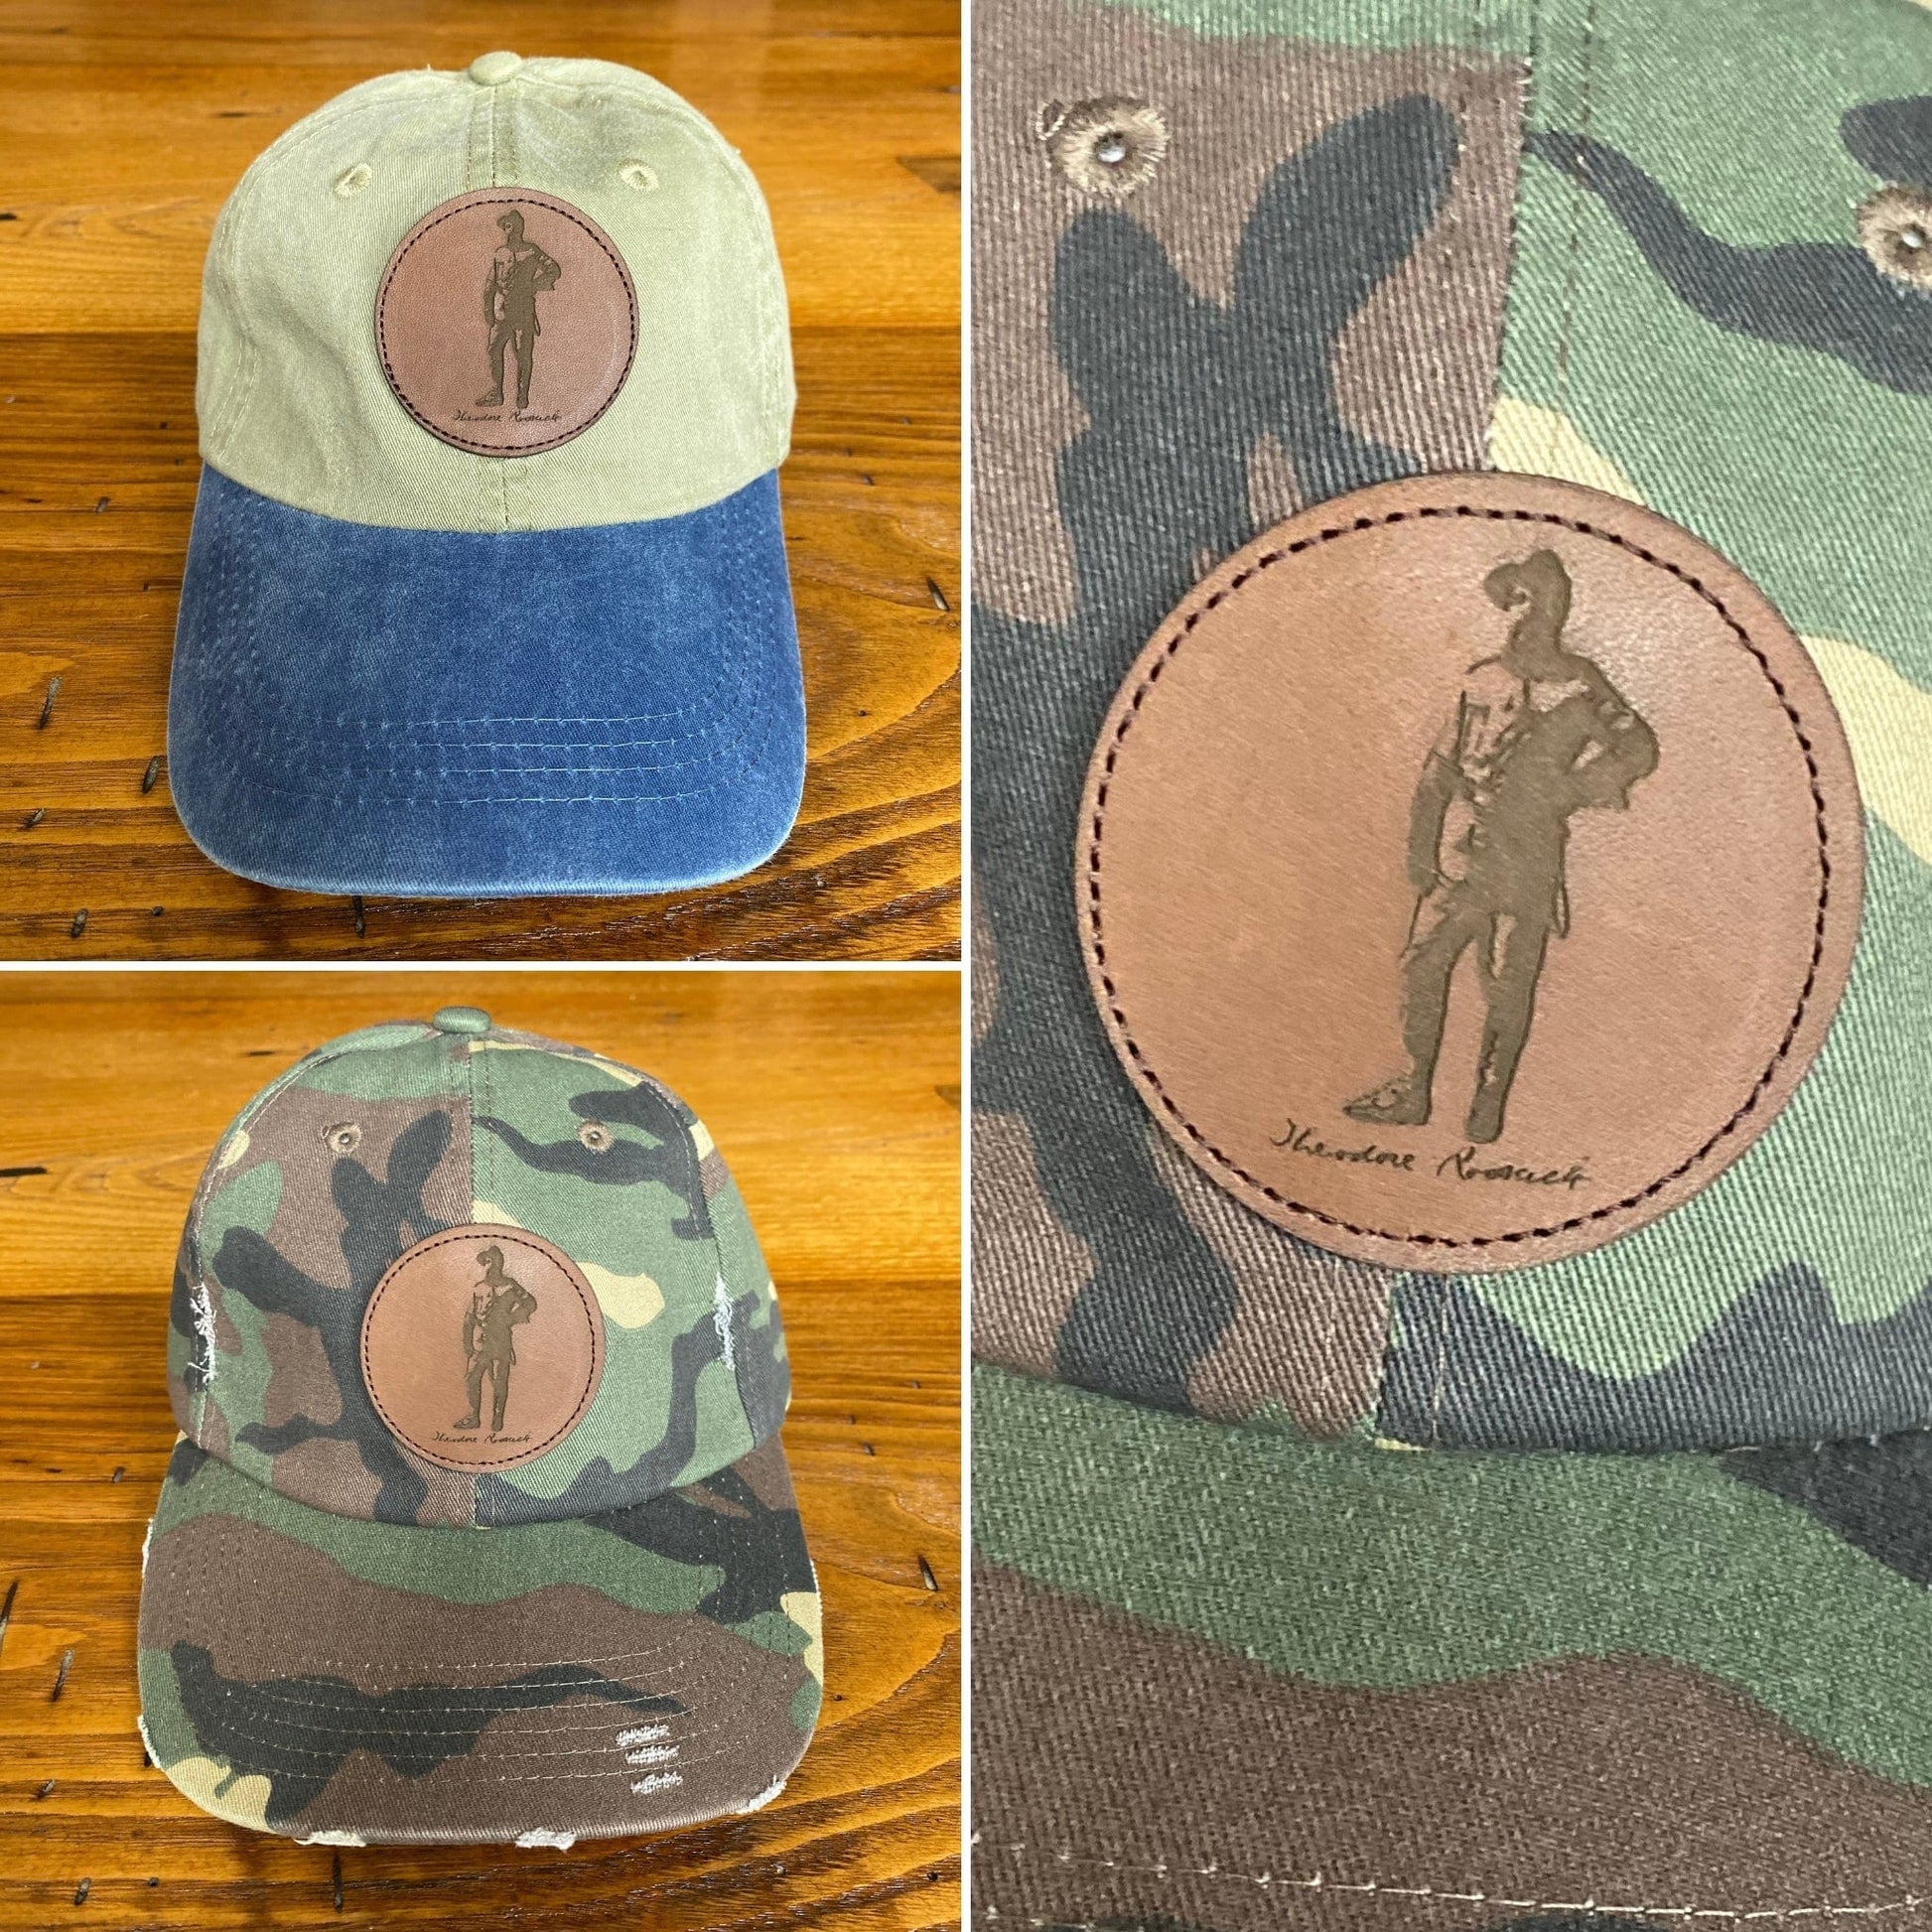 Theodore Roosevelt "Signature Series" Leather patch cap from the History List Store